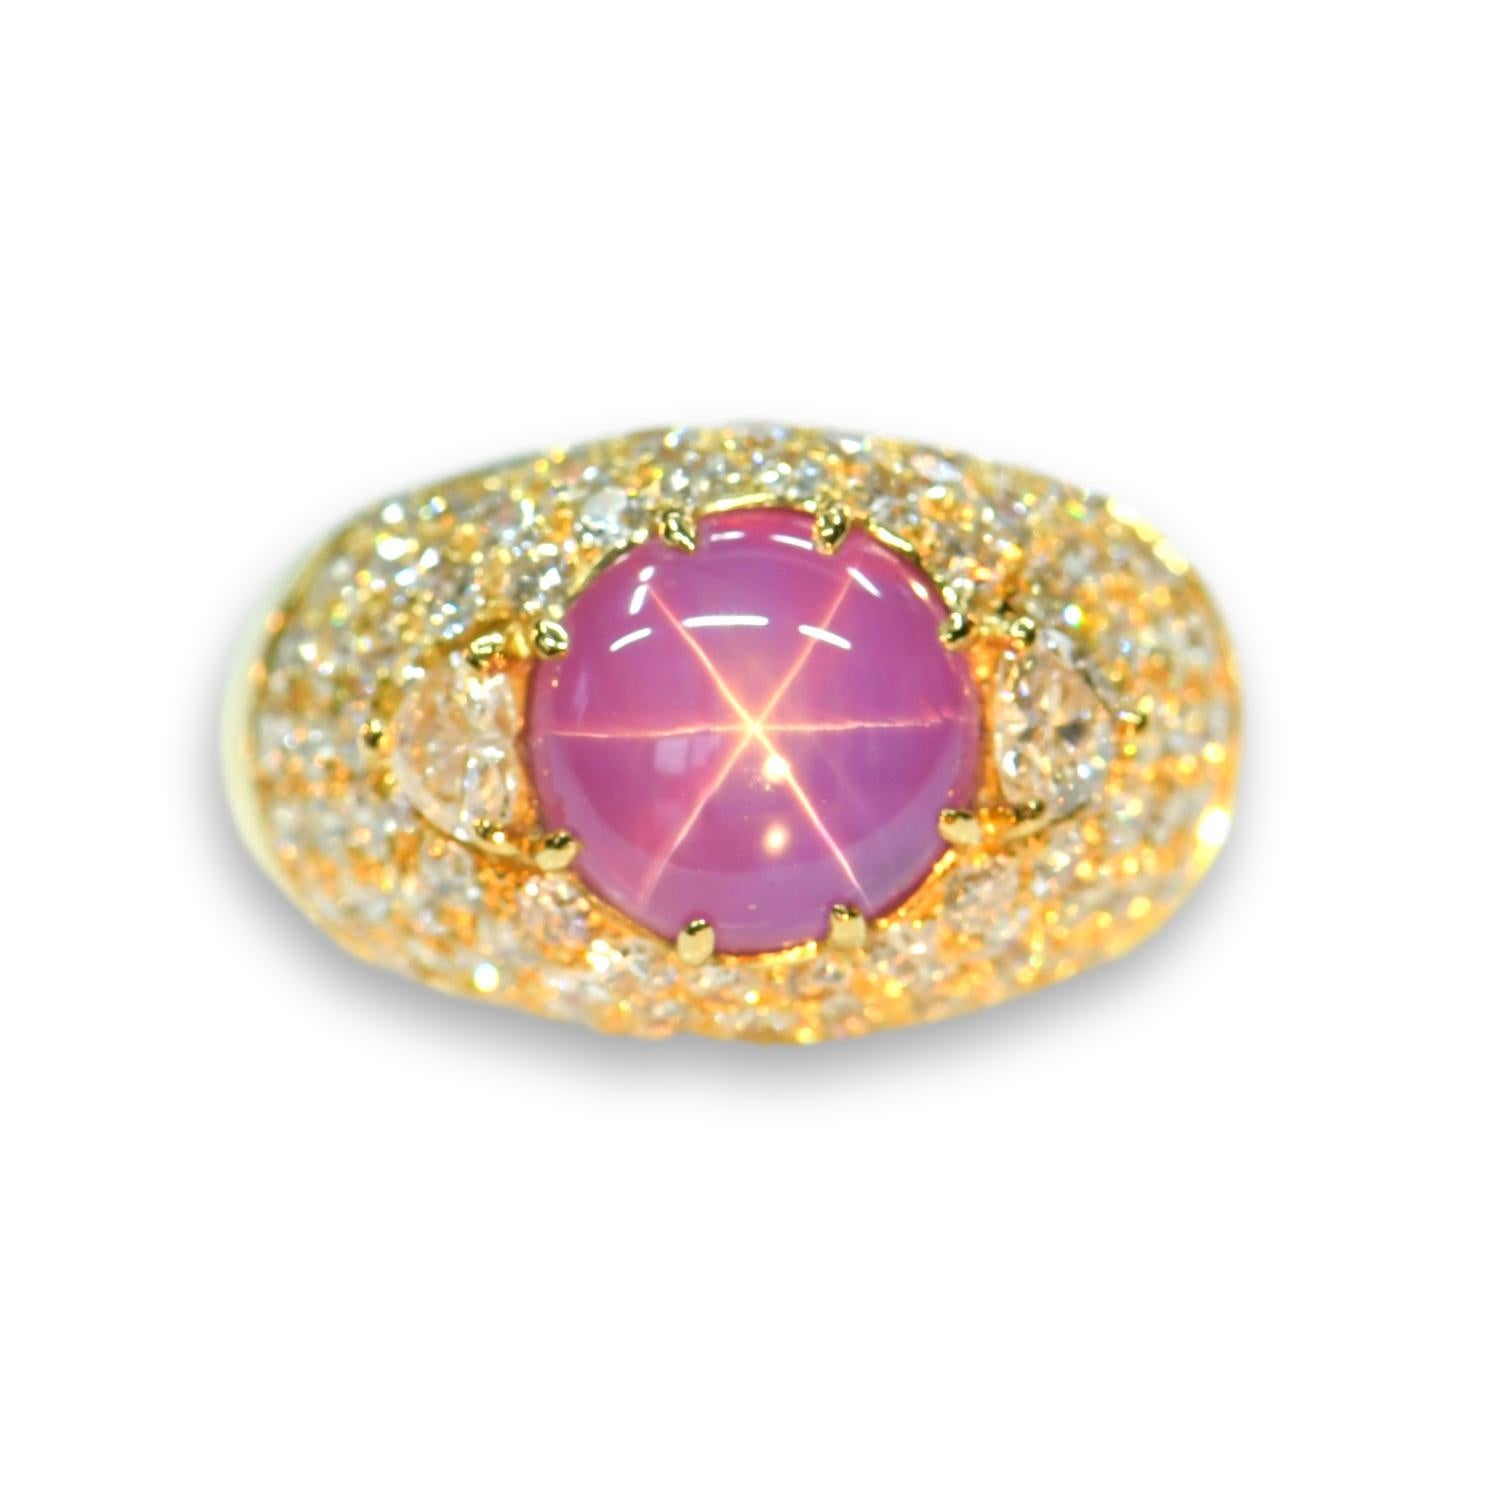 A beautiful pink star sapphire and diamond ring set to center with a very sharp oval cabochon pink sapphire that are surrounded by a plethora of small diamonds and two heart-shaped diamonds. It looks wonderful on the finger and would make a stunning